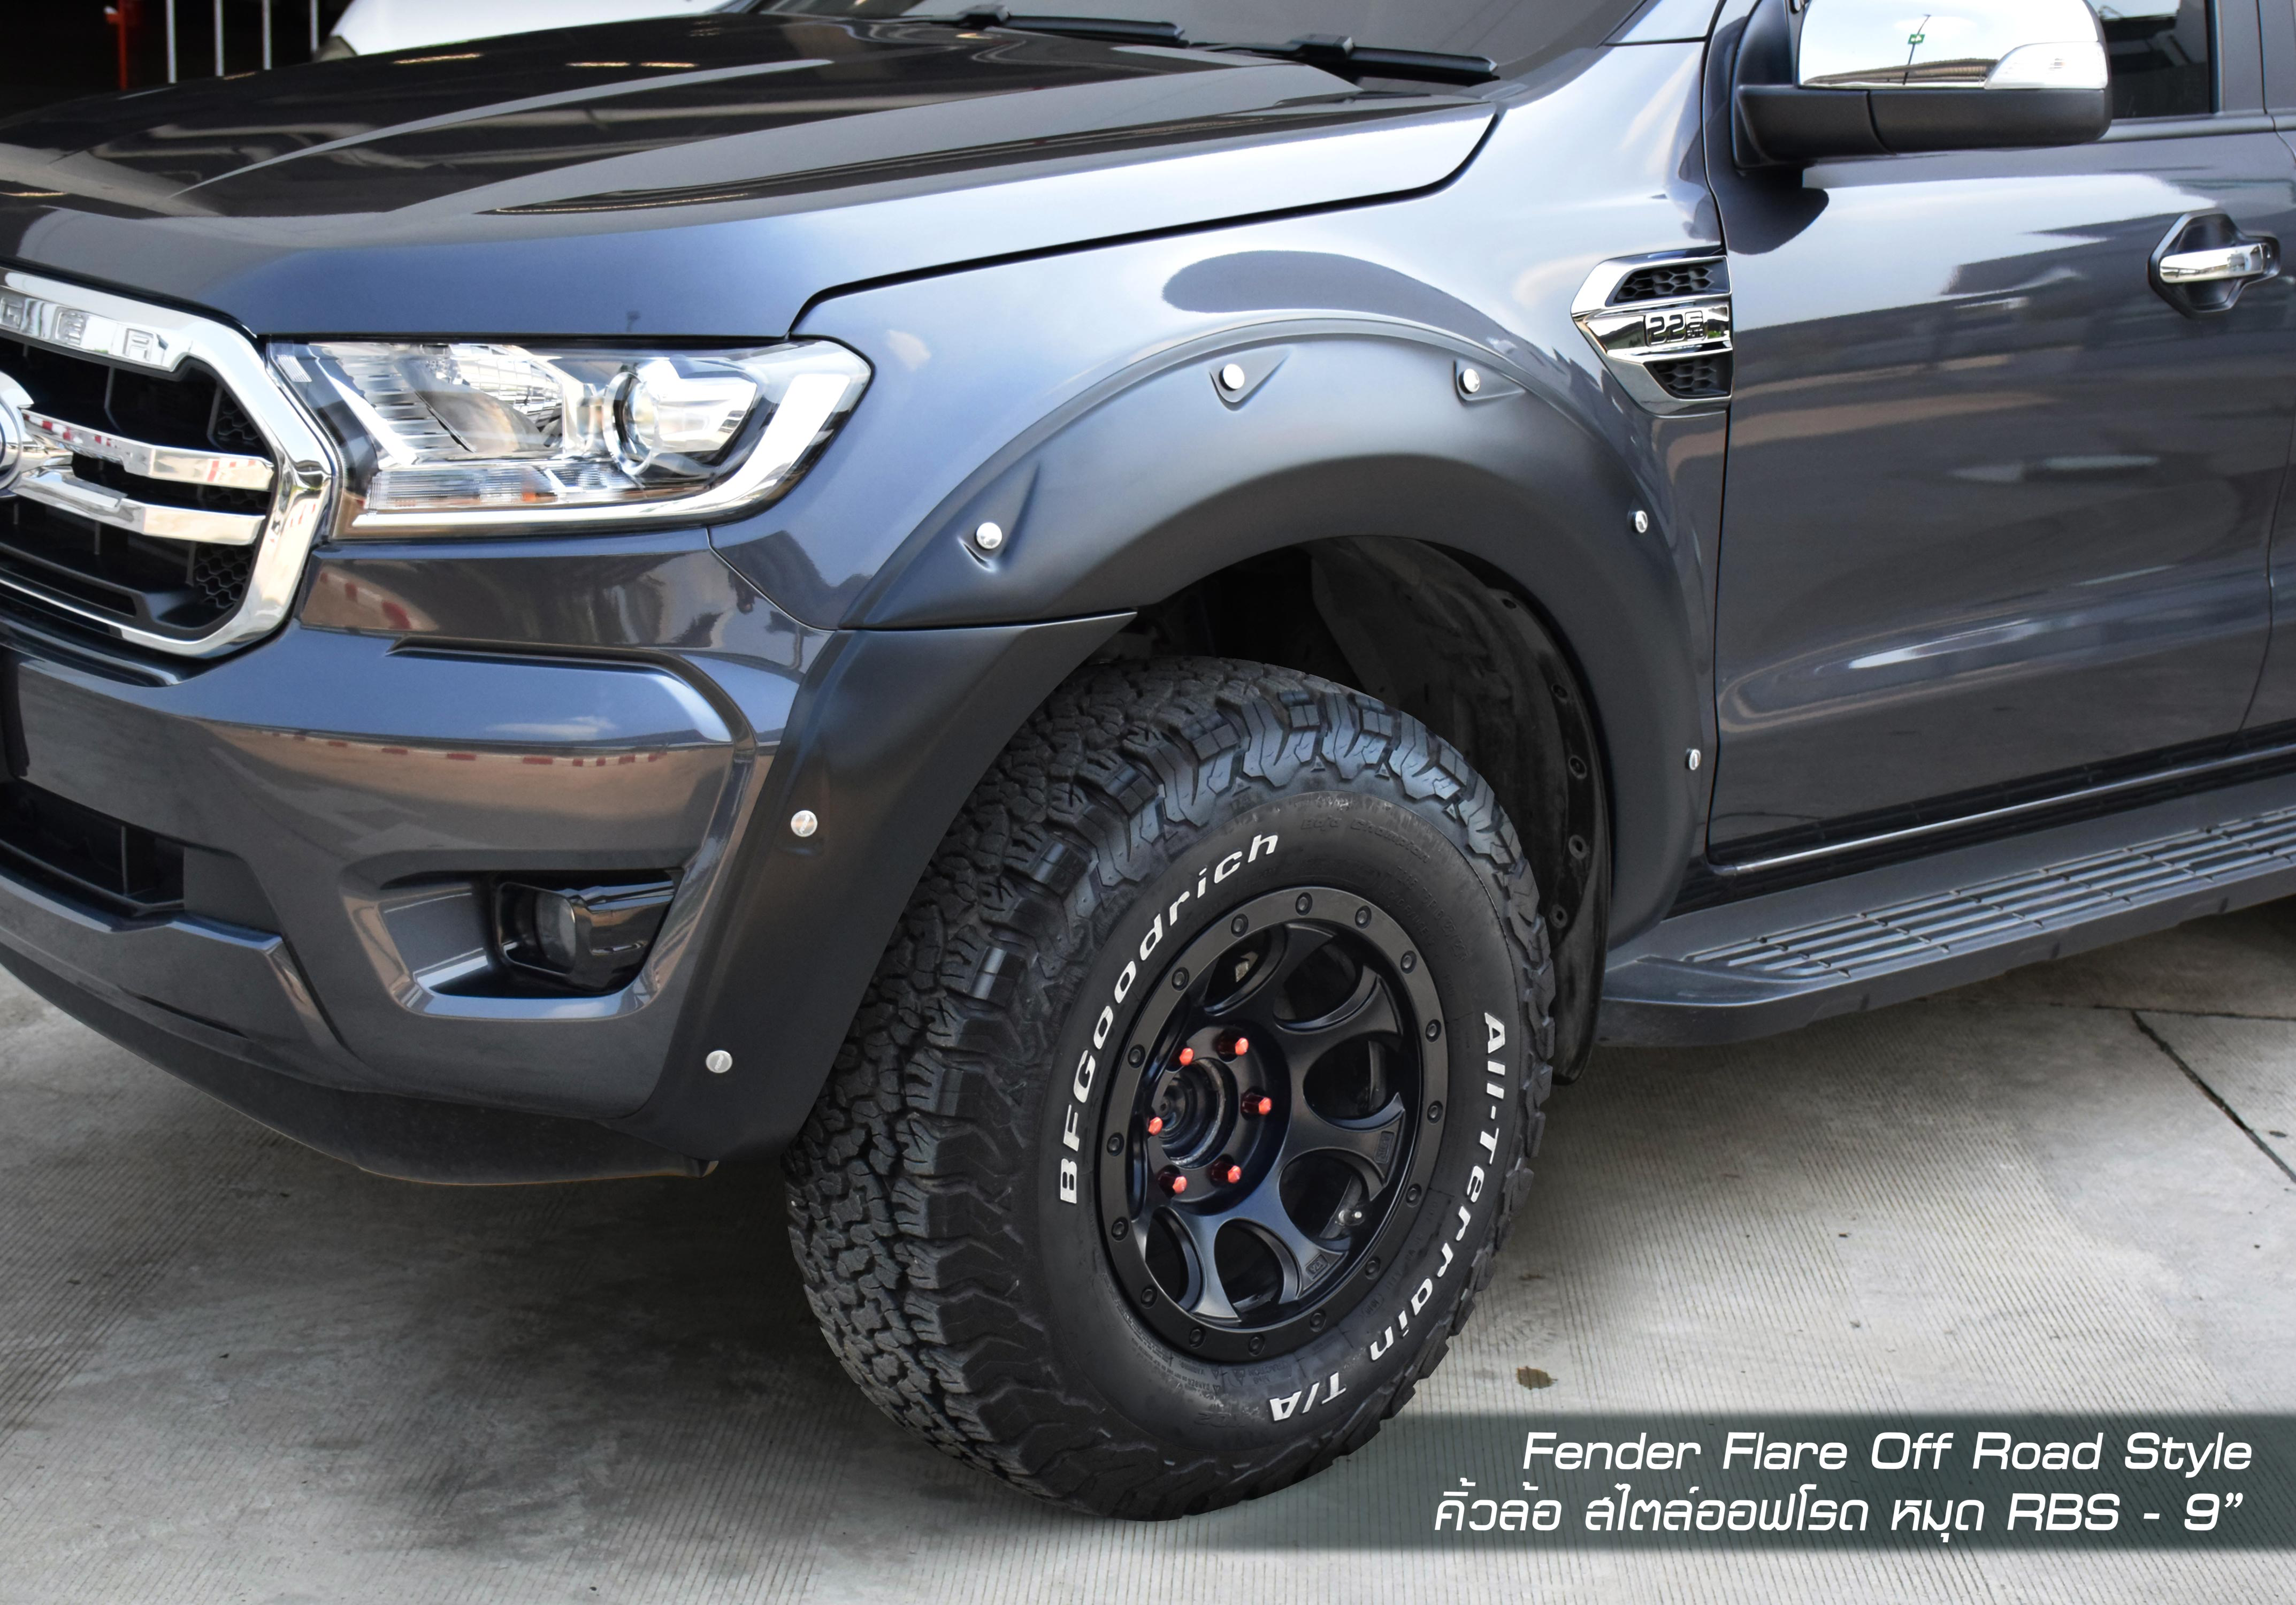 Fender Flares Offroad Style 9'' Ford Ranger